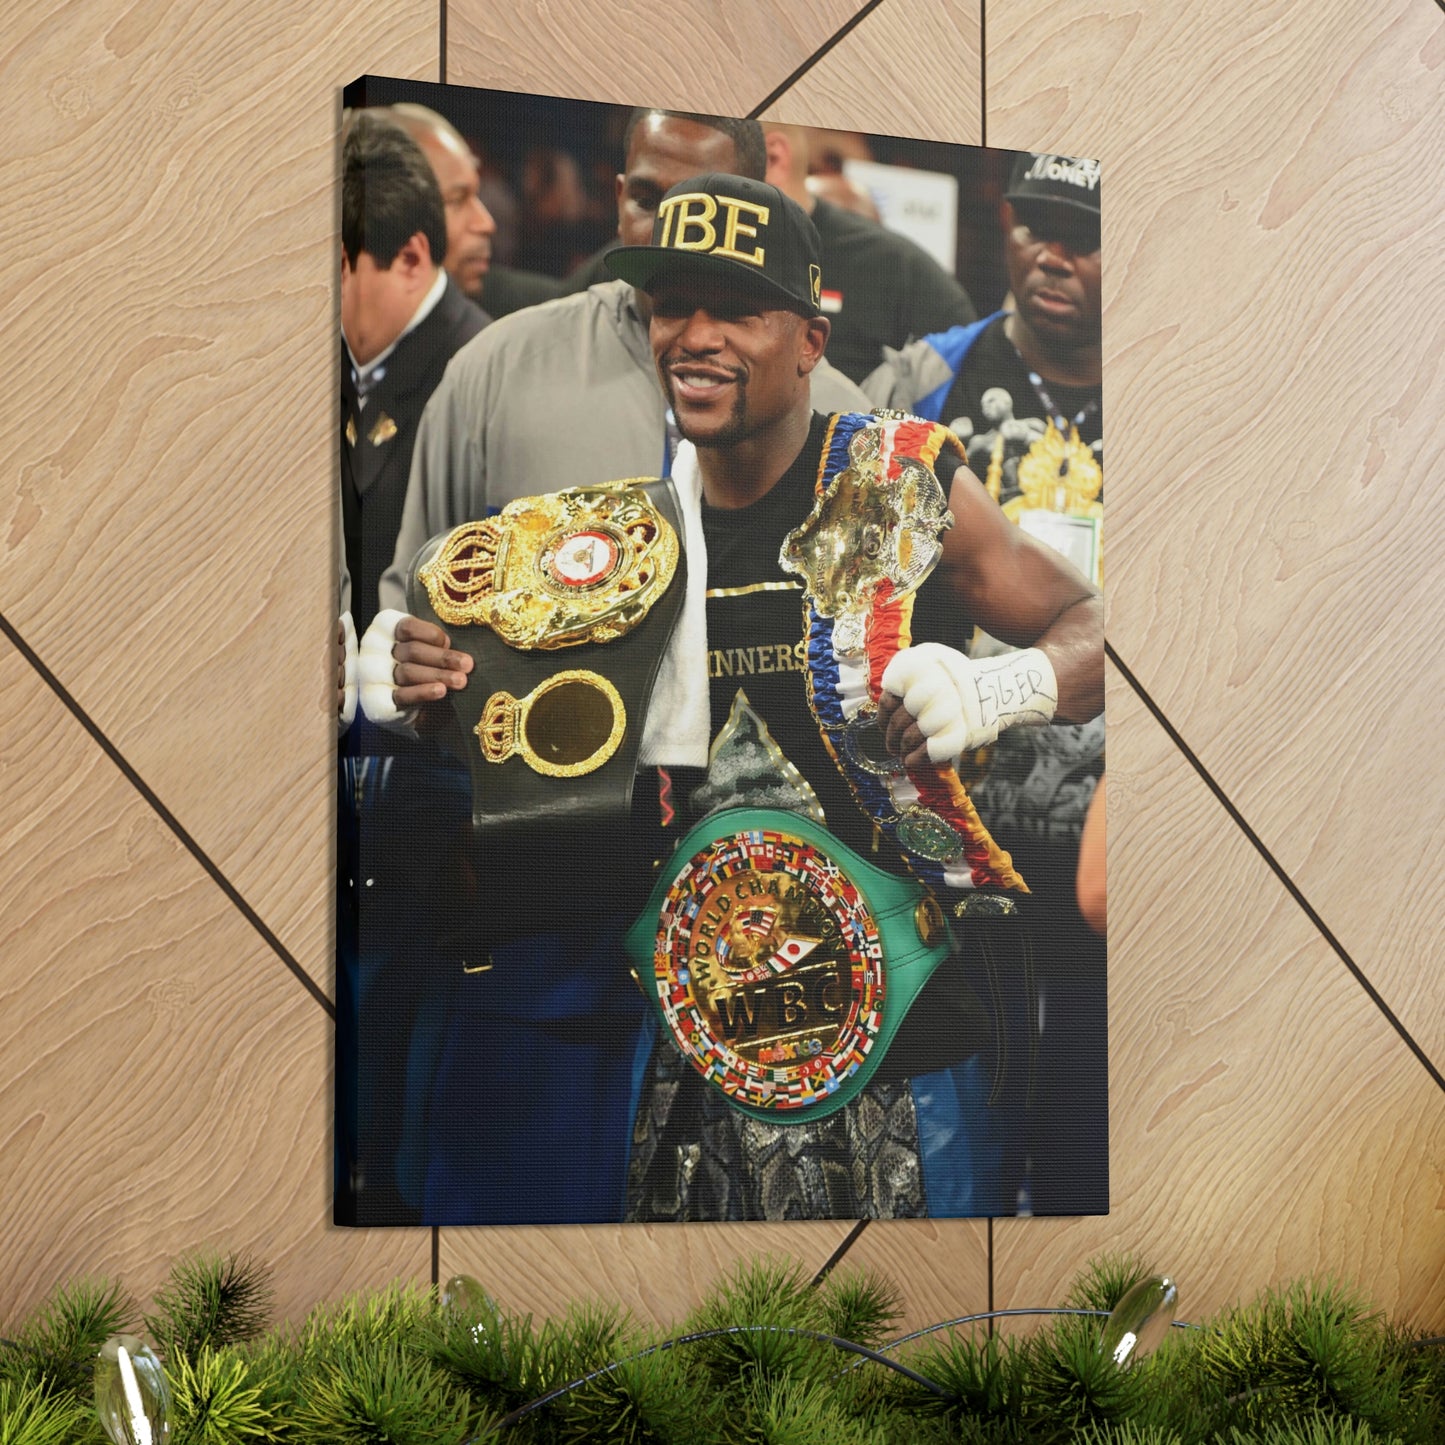 Floyd "Money" Mayweather Posing In The Ring With WBC, WBA, And The Ring Title Belts Canvas Wall Art